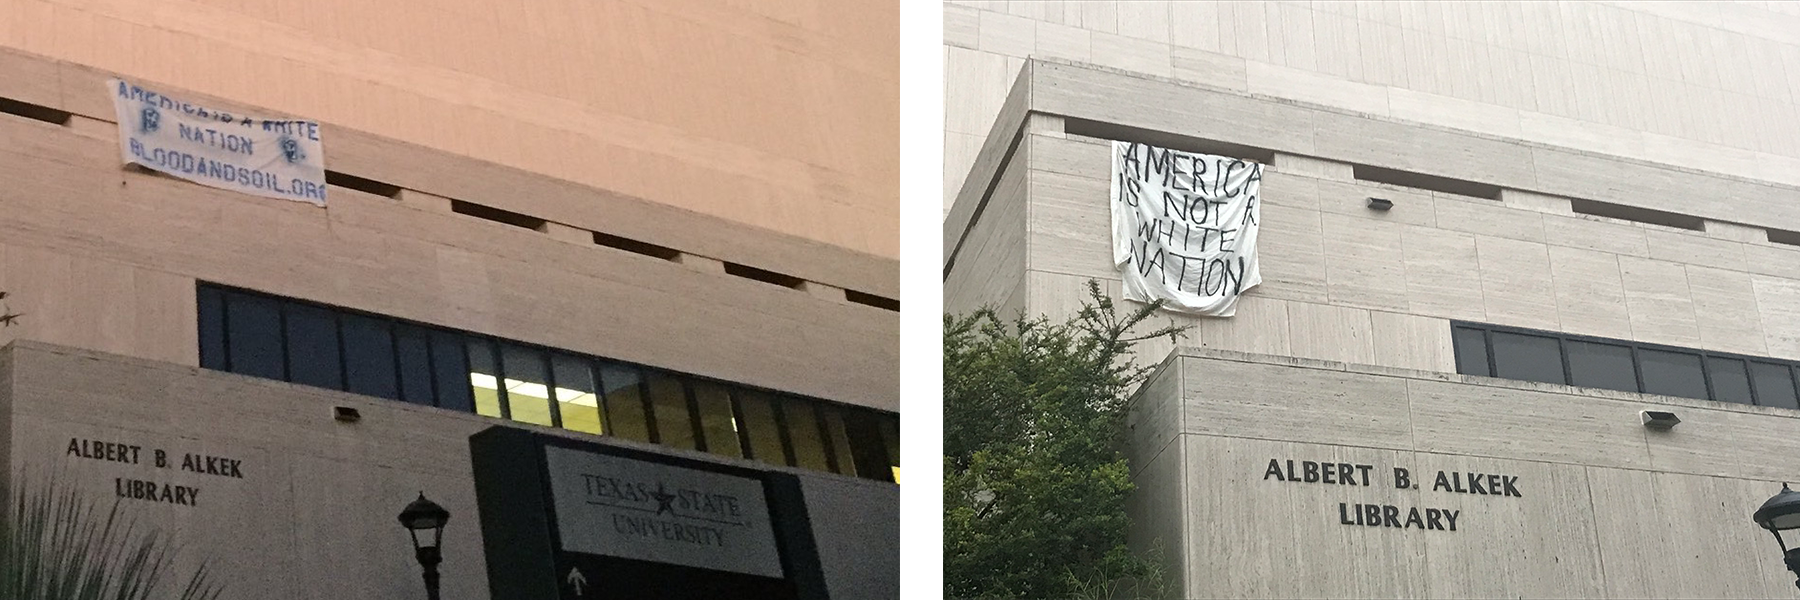 White+nationalist+banner+posted+on+exterior+of+Alkek+Library